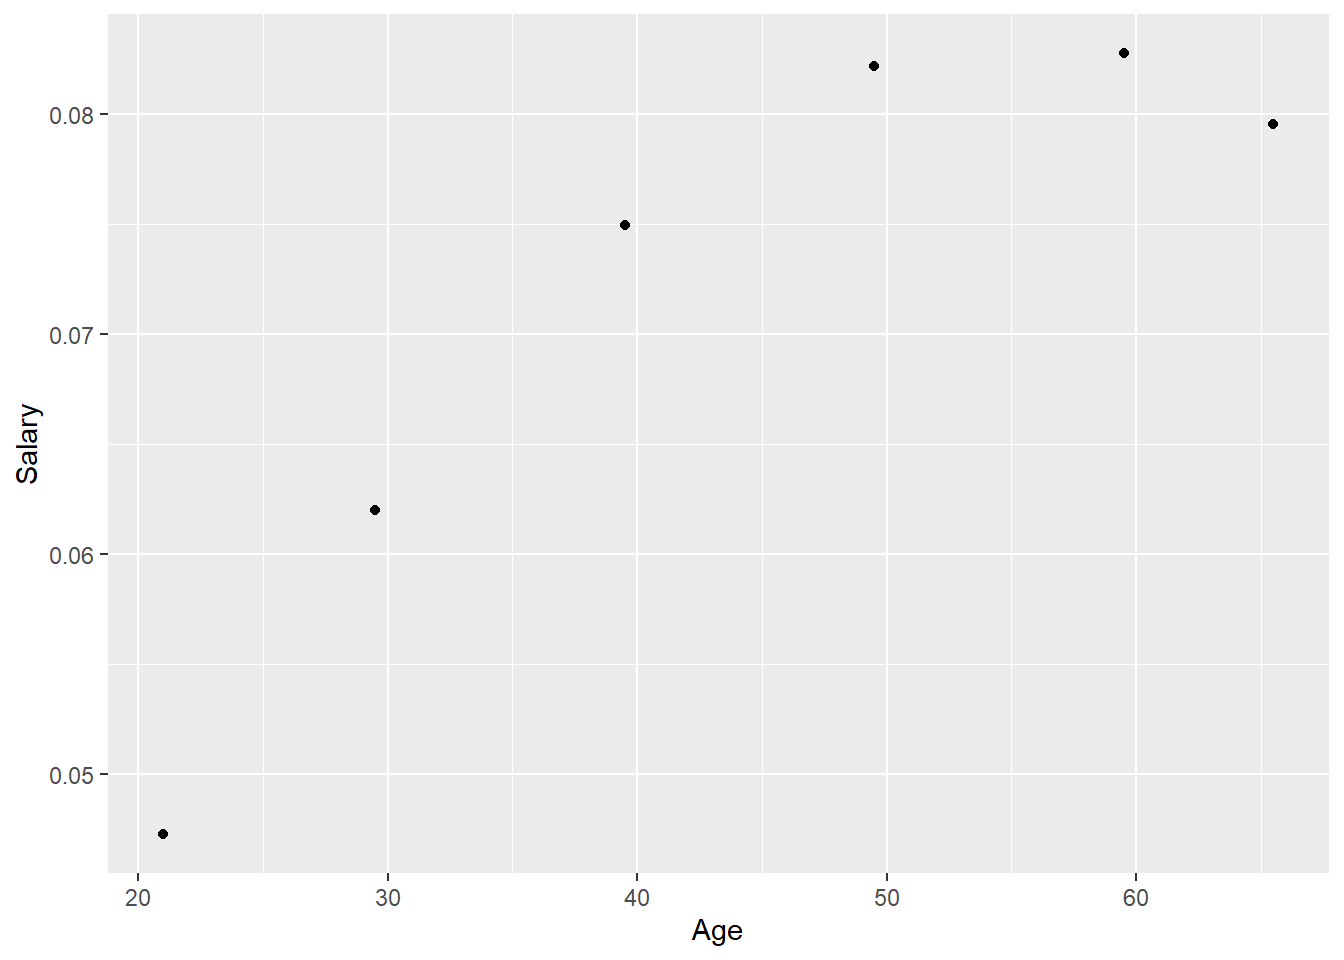 Model fit, Assemblers, Correlation between age and salary